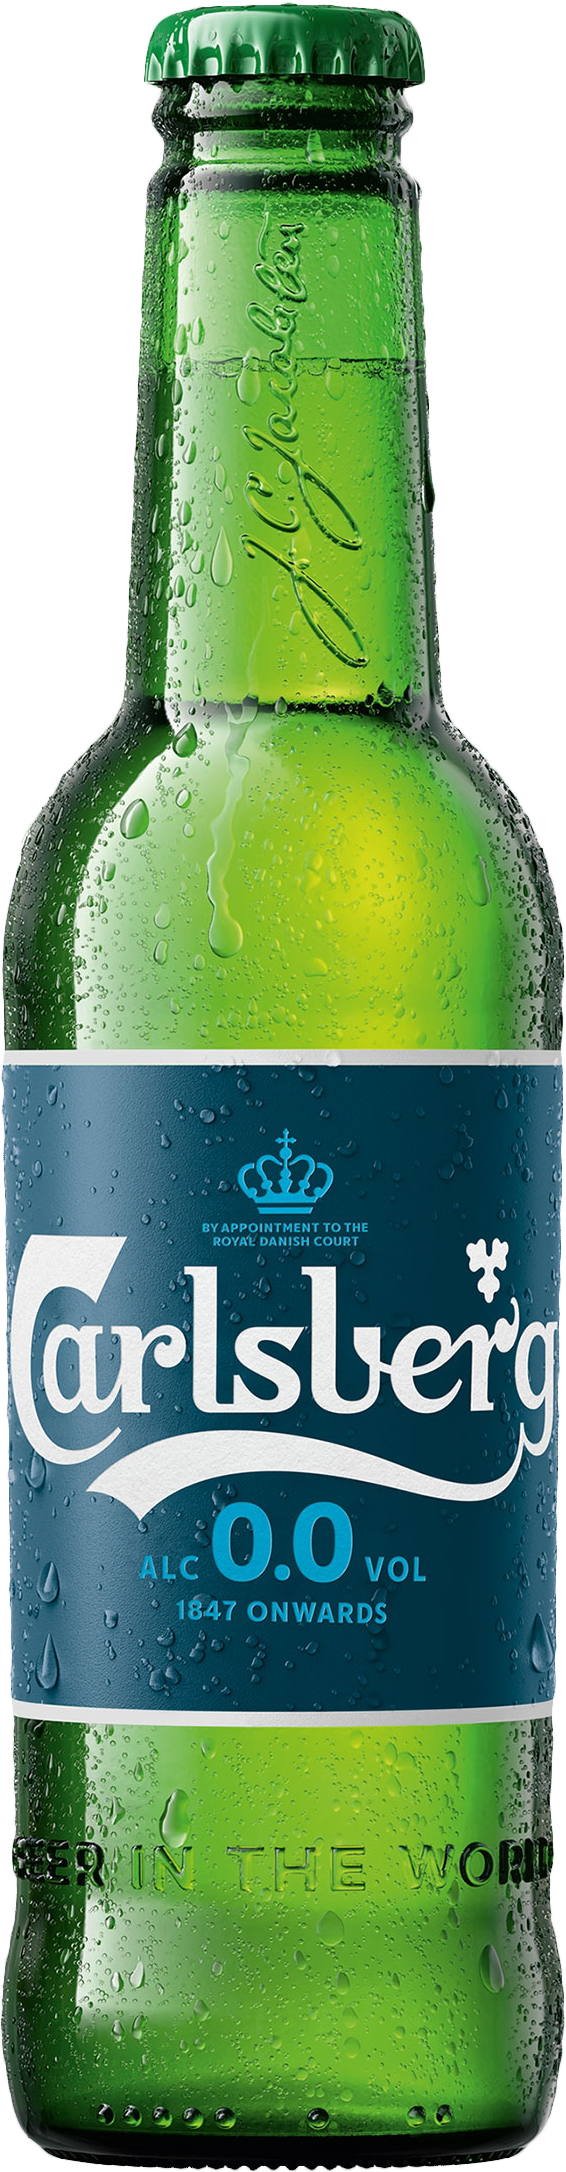 bottle of Carlsberg alcohol-free beer with 0.0 alcohol percent